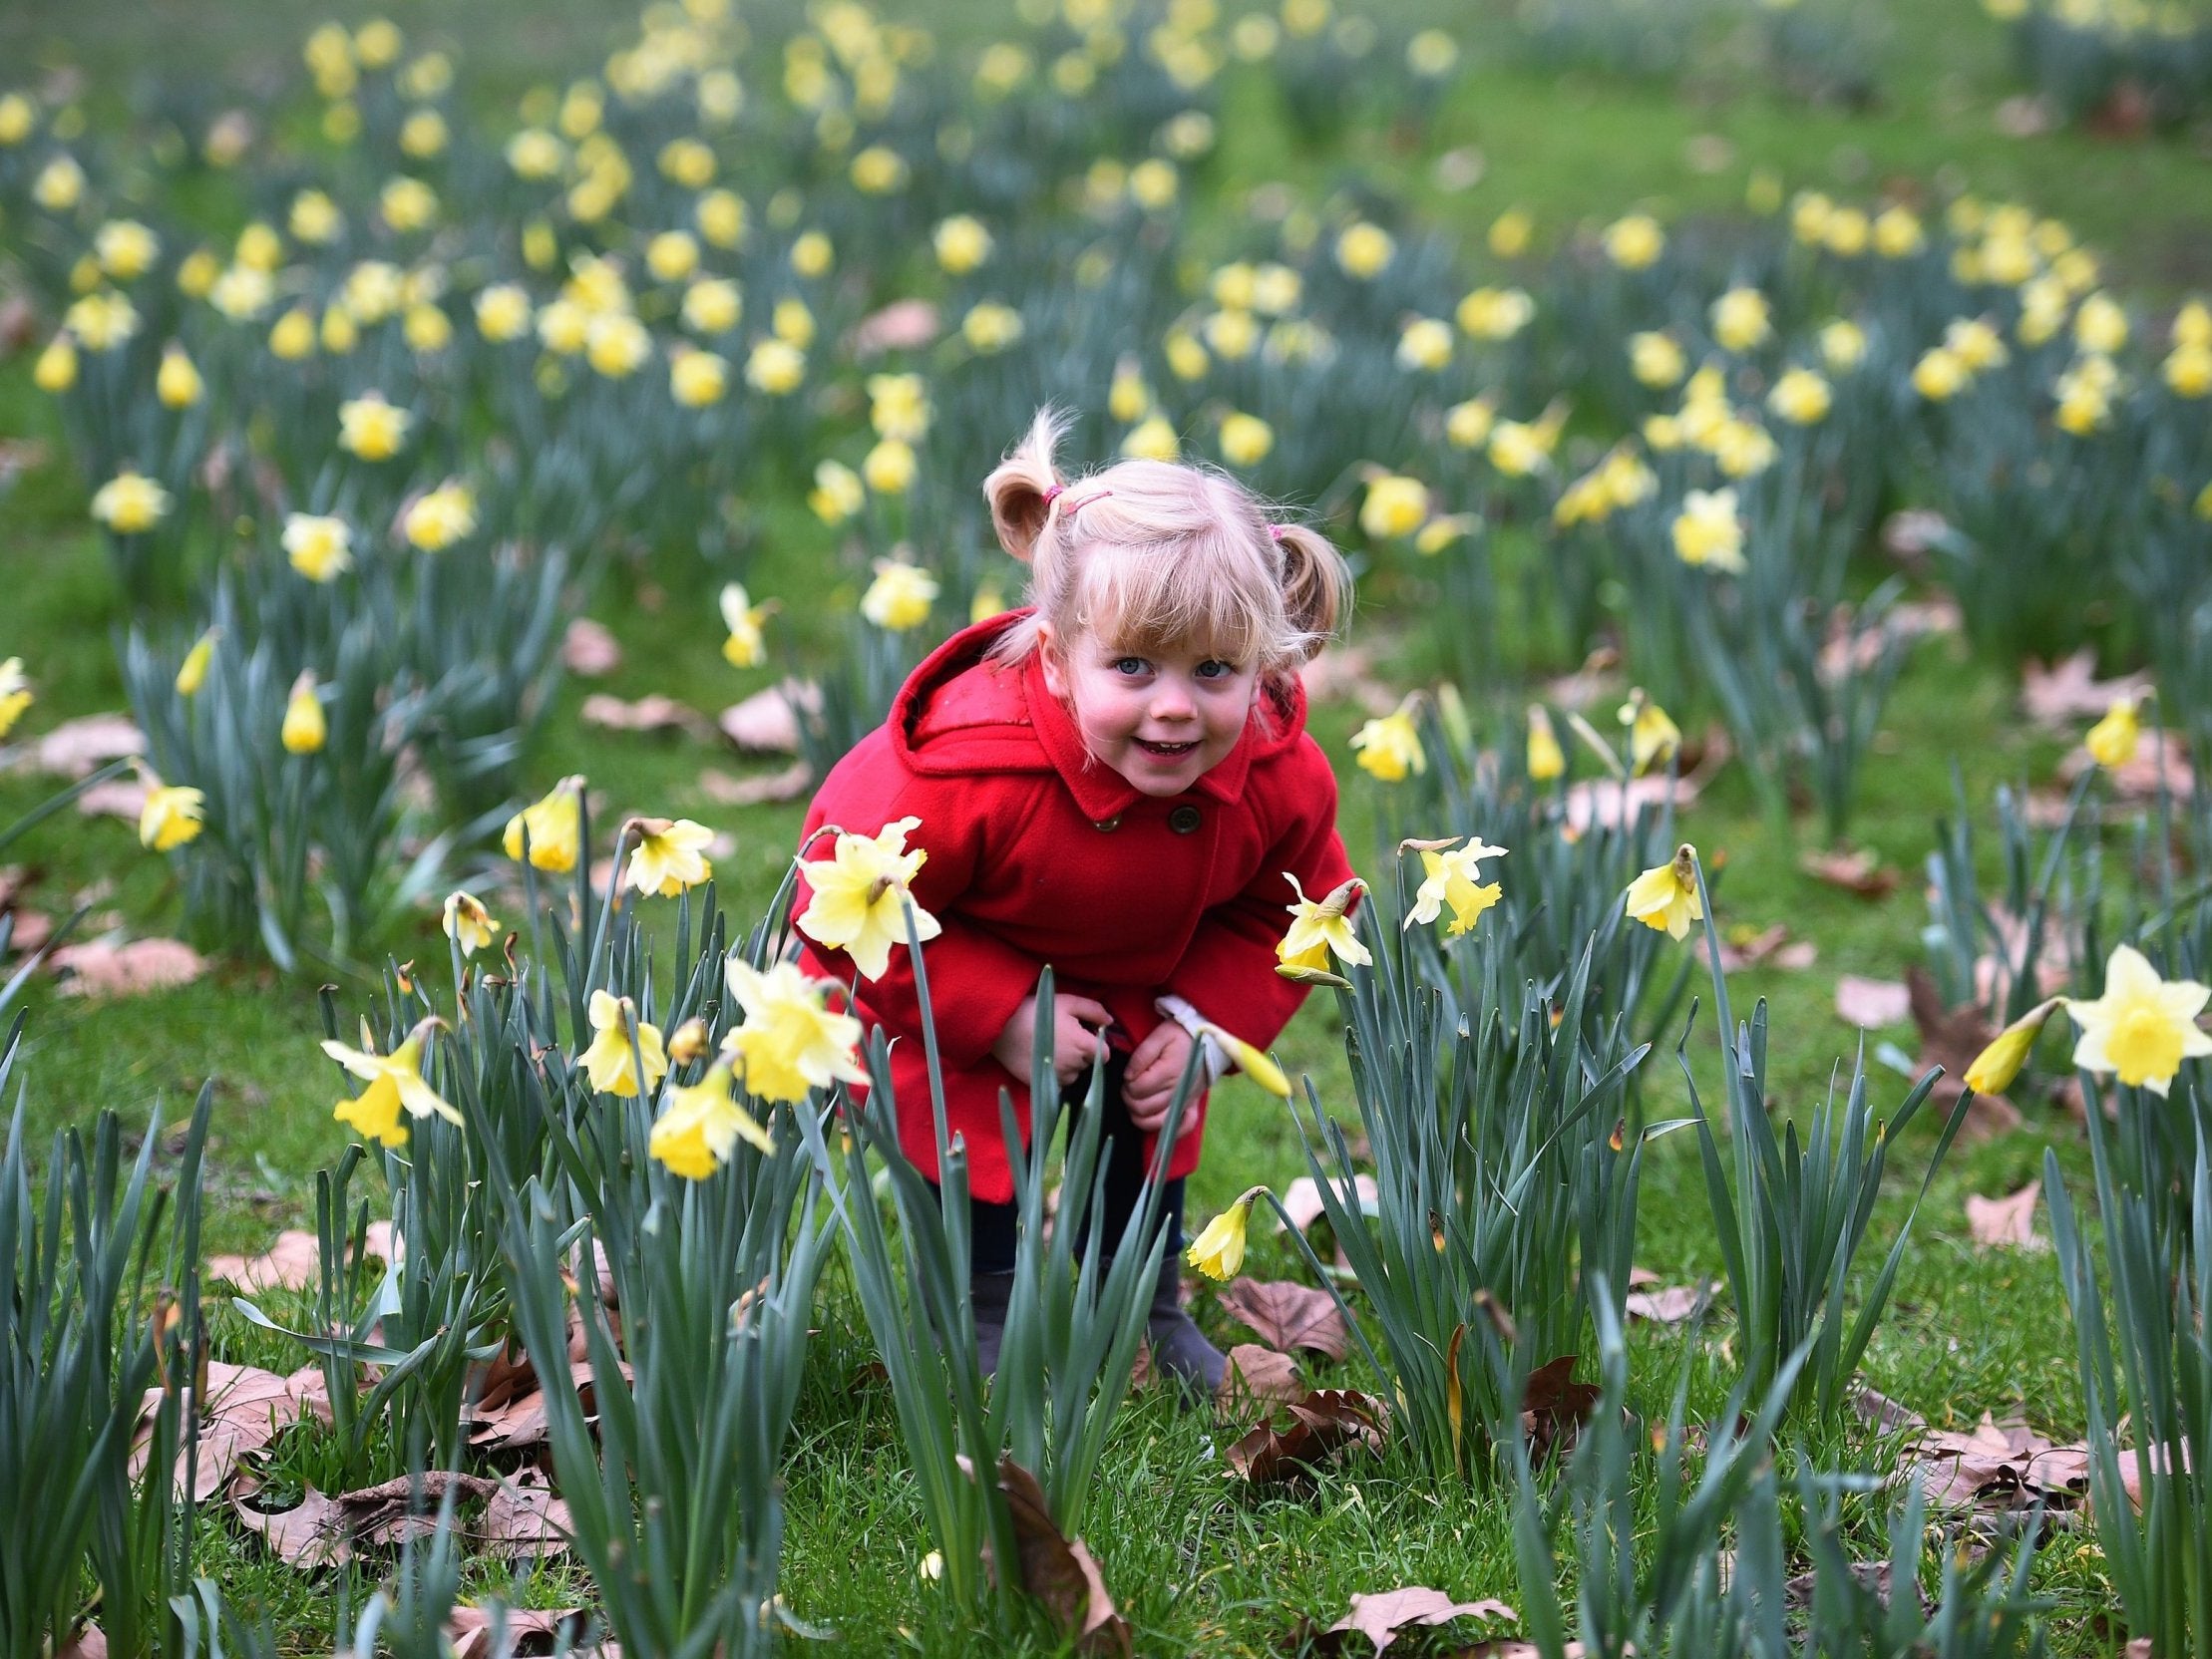 Florence O'Sullivan, three, plays in the daffodils in Green Park, London, on 20 February 2019.